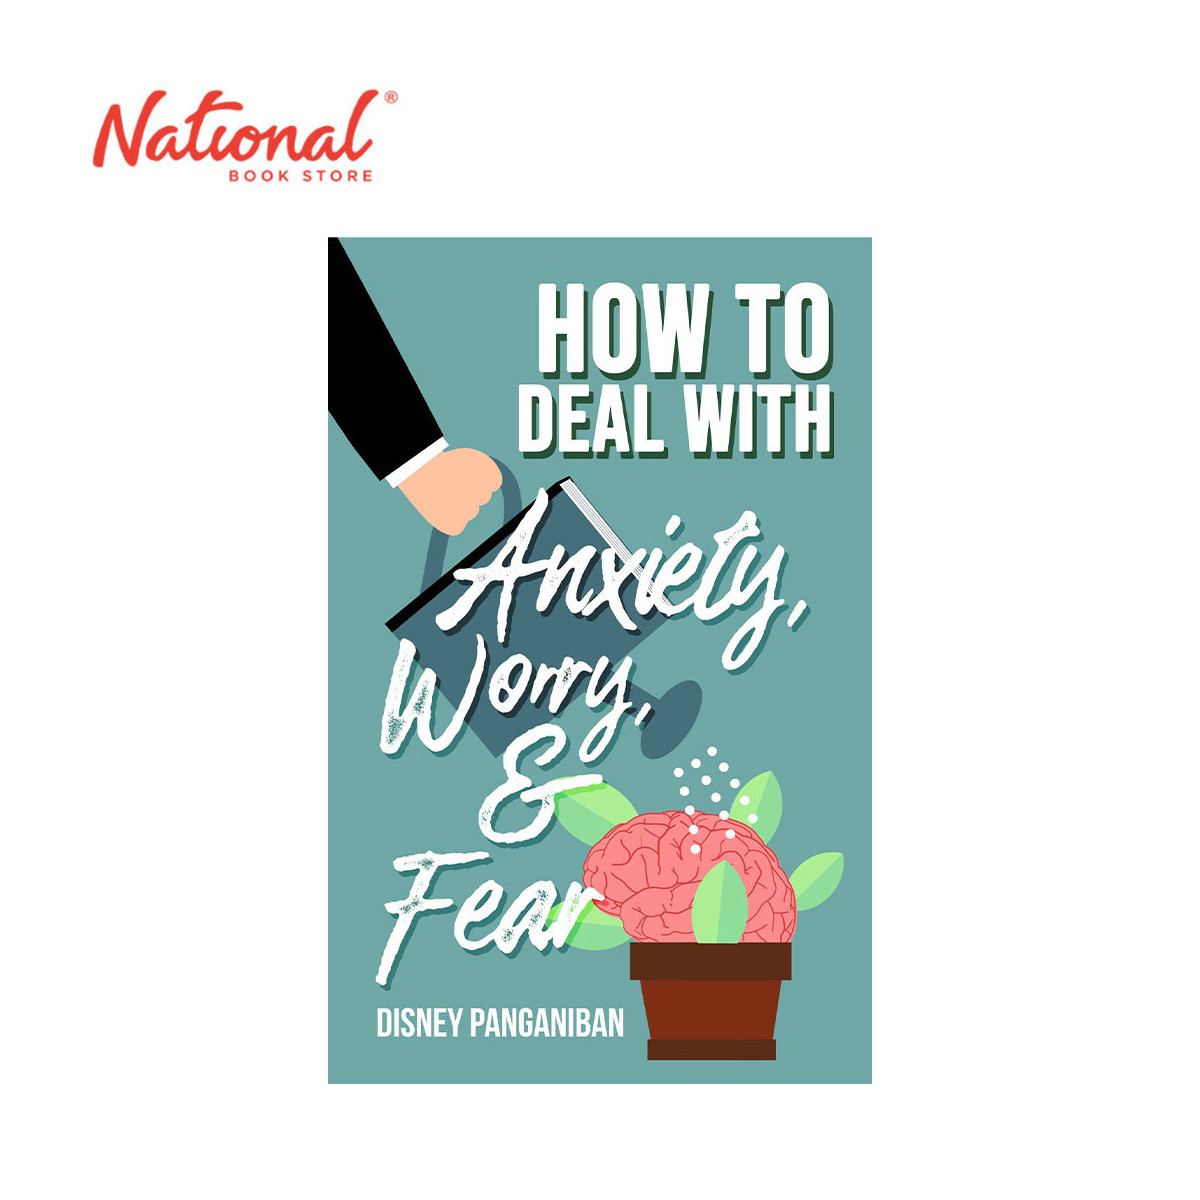 How To Deal With Anxiety Wrry Fear by Disney Panganiban - Trade Paperback - Self-Help Books